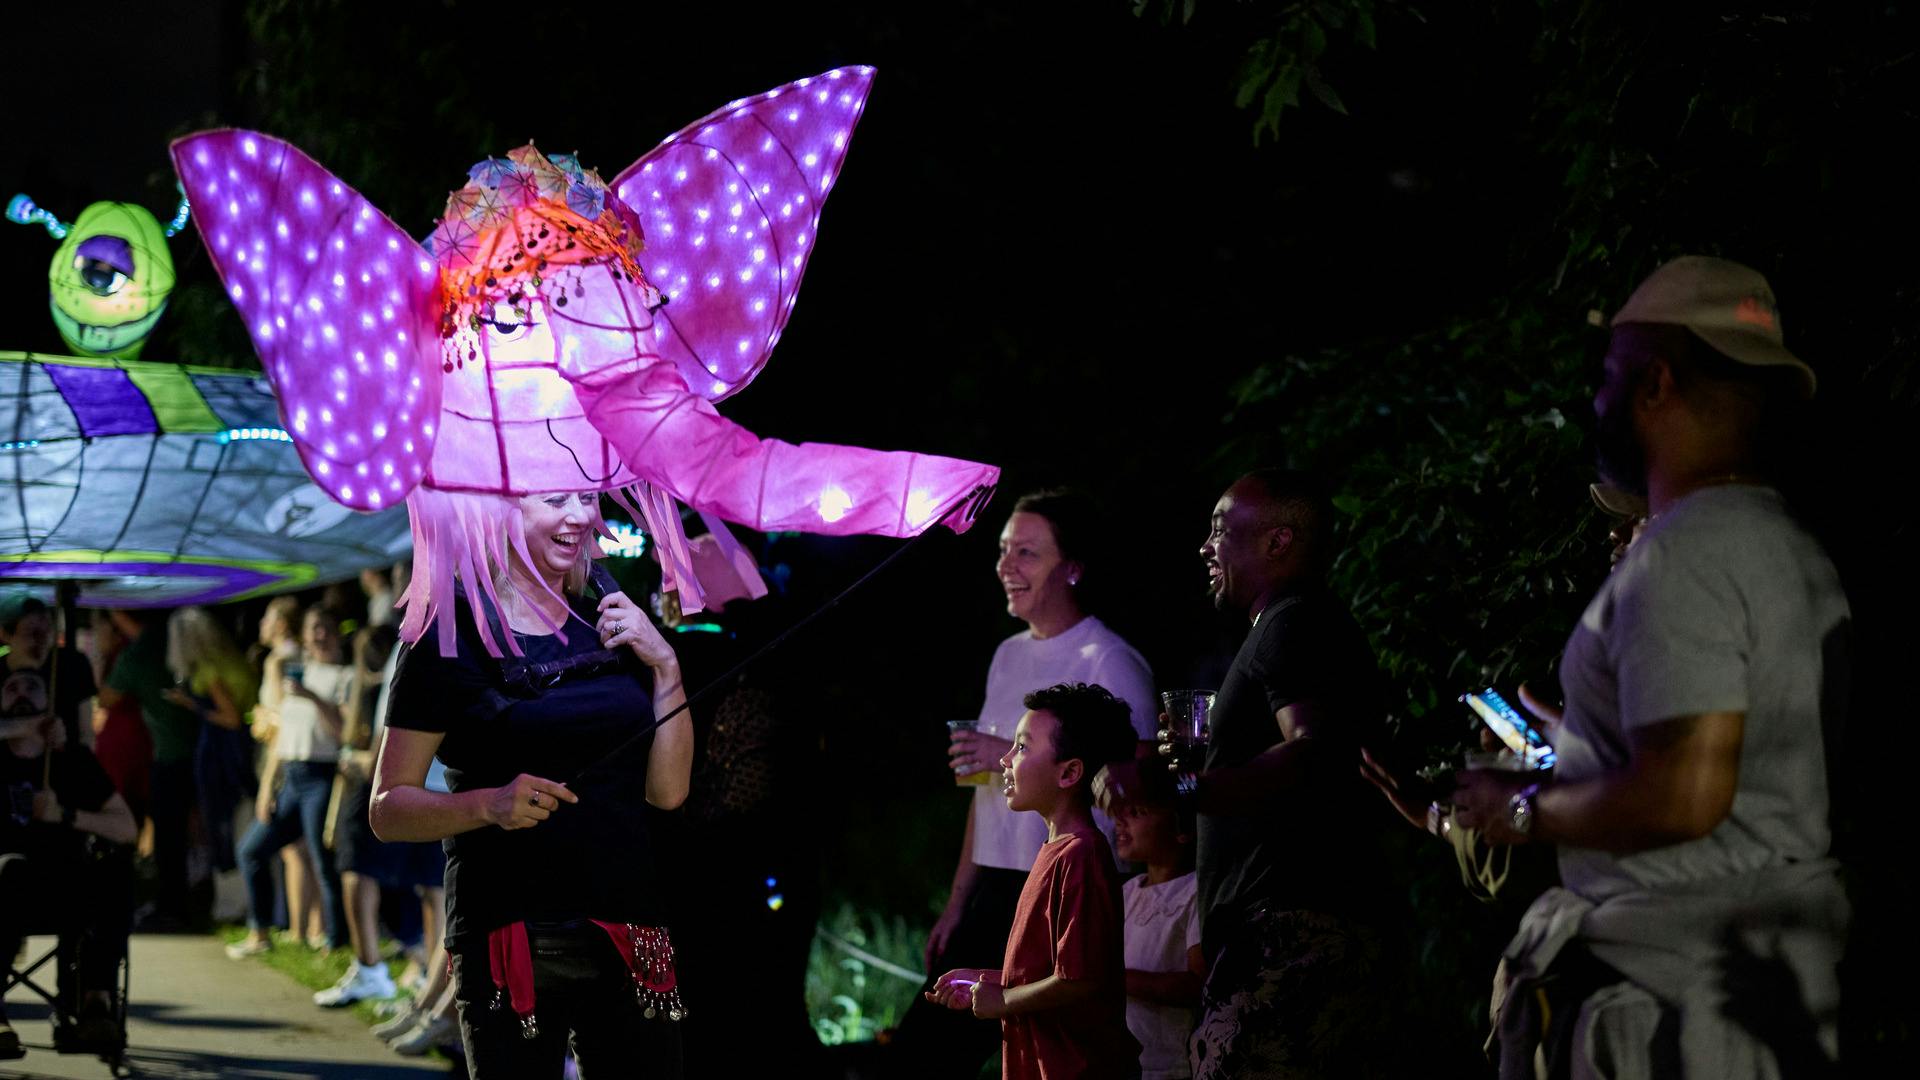 A woman stands in front of a smiling child with a large, illuminated elephant lantern.